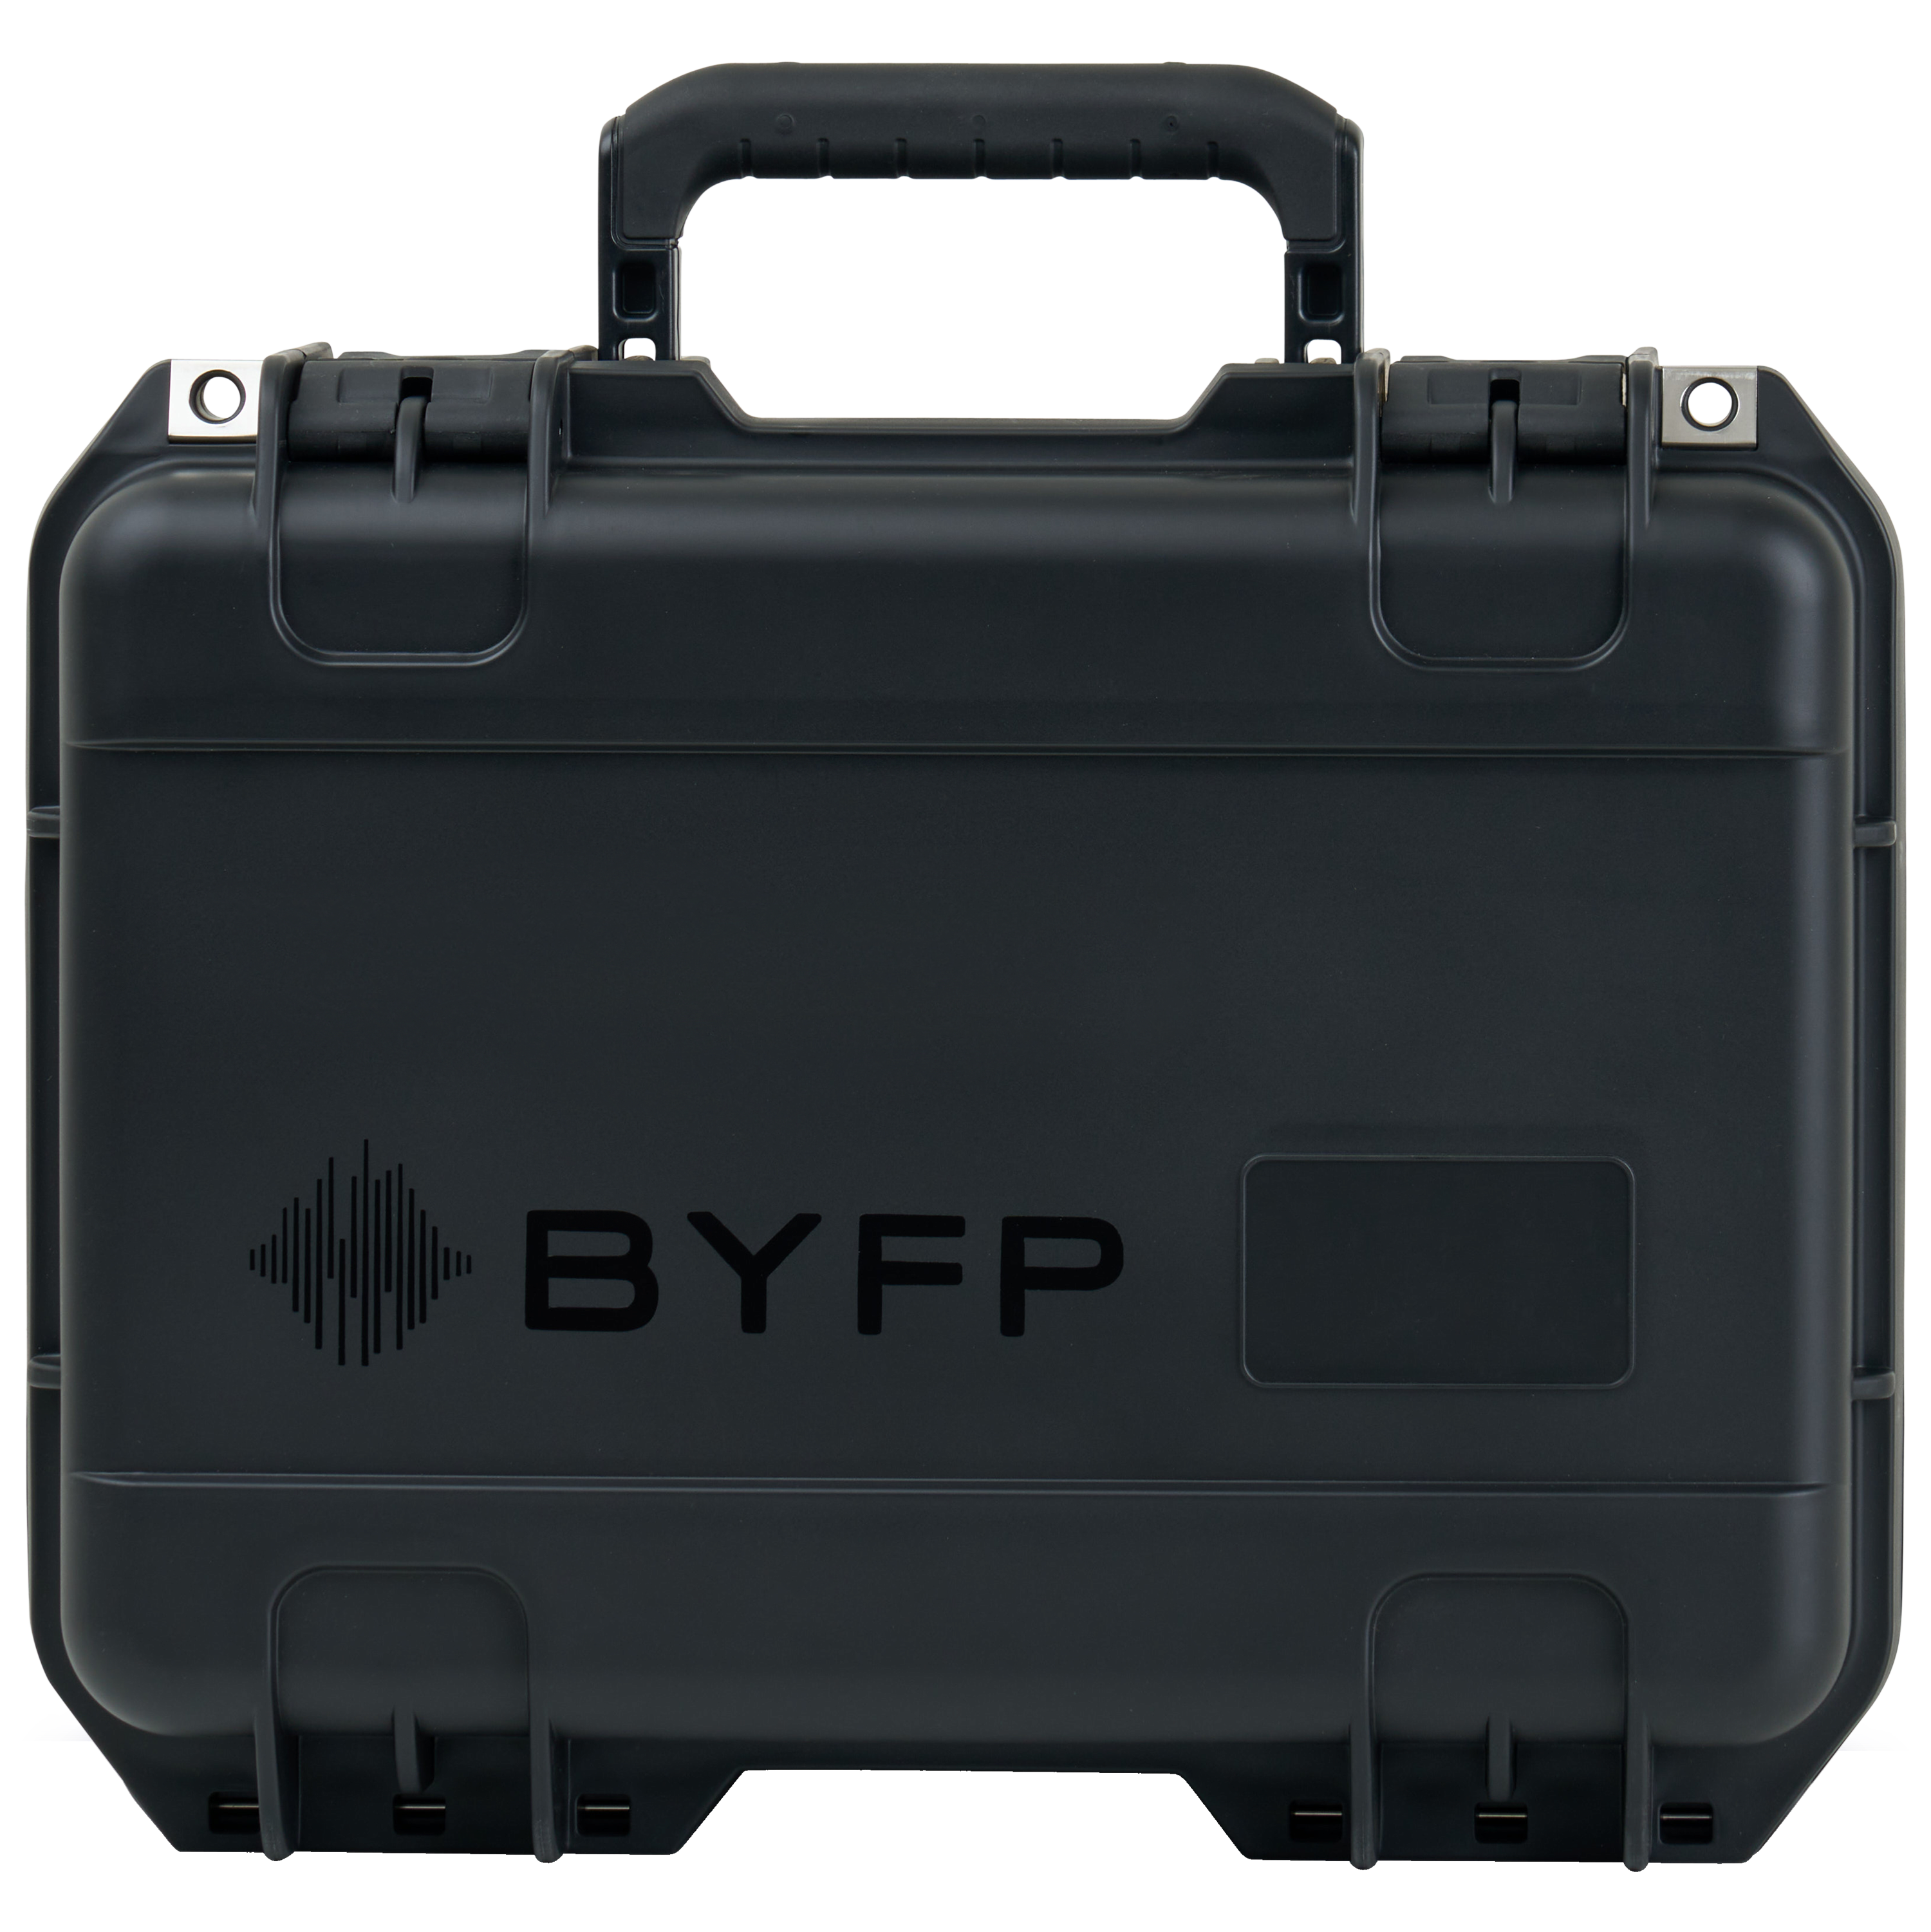 BYFP ipCase for 4x Roland Converters